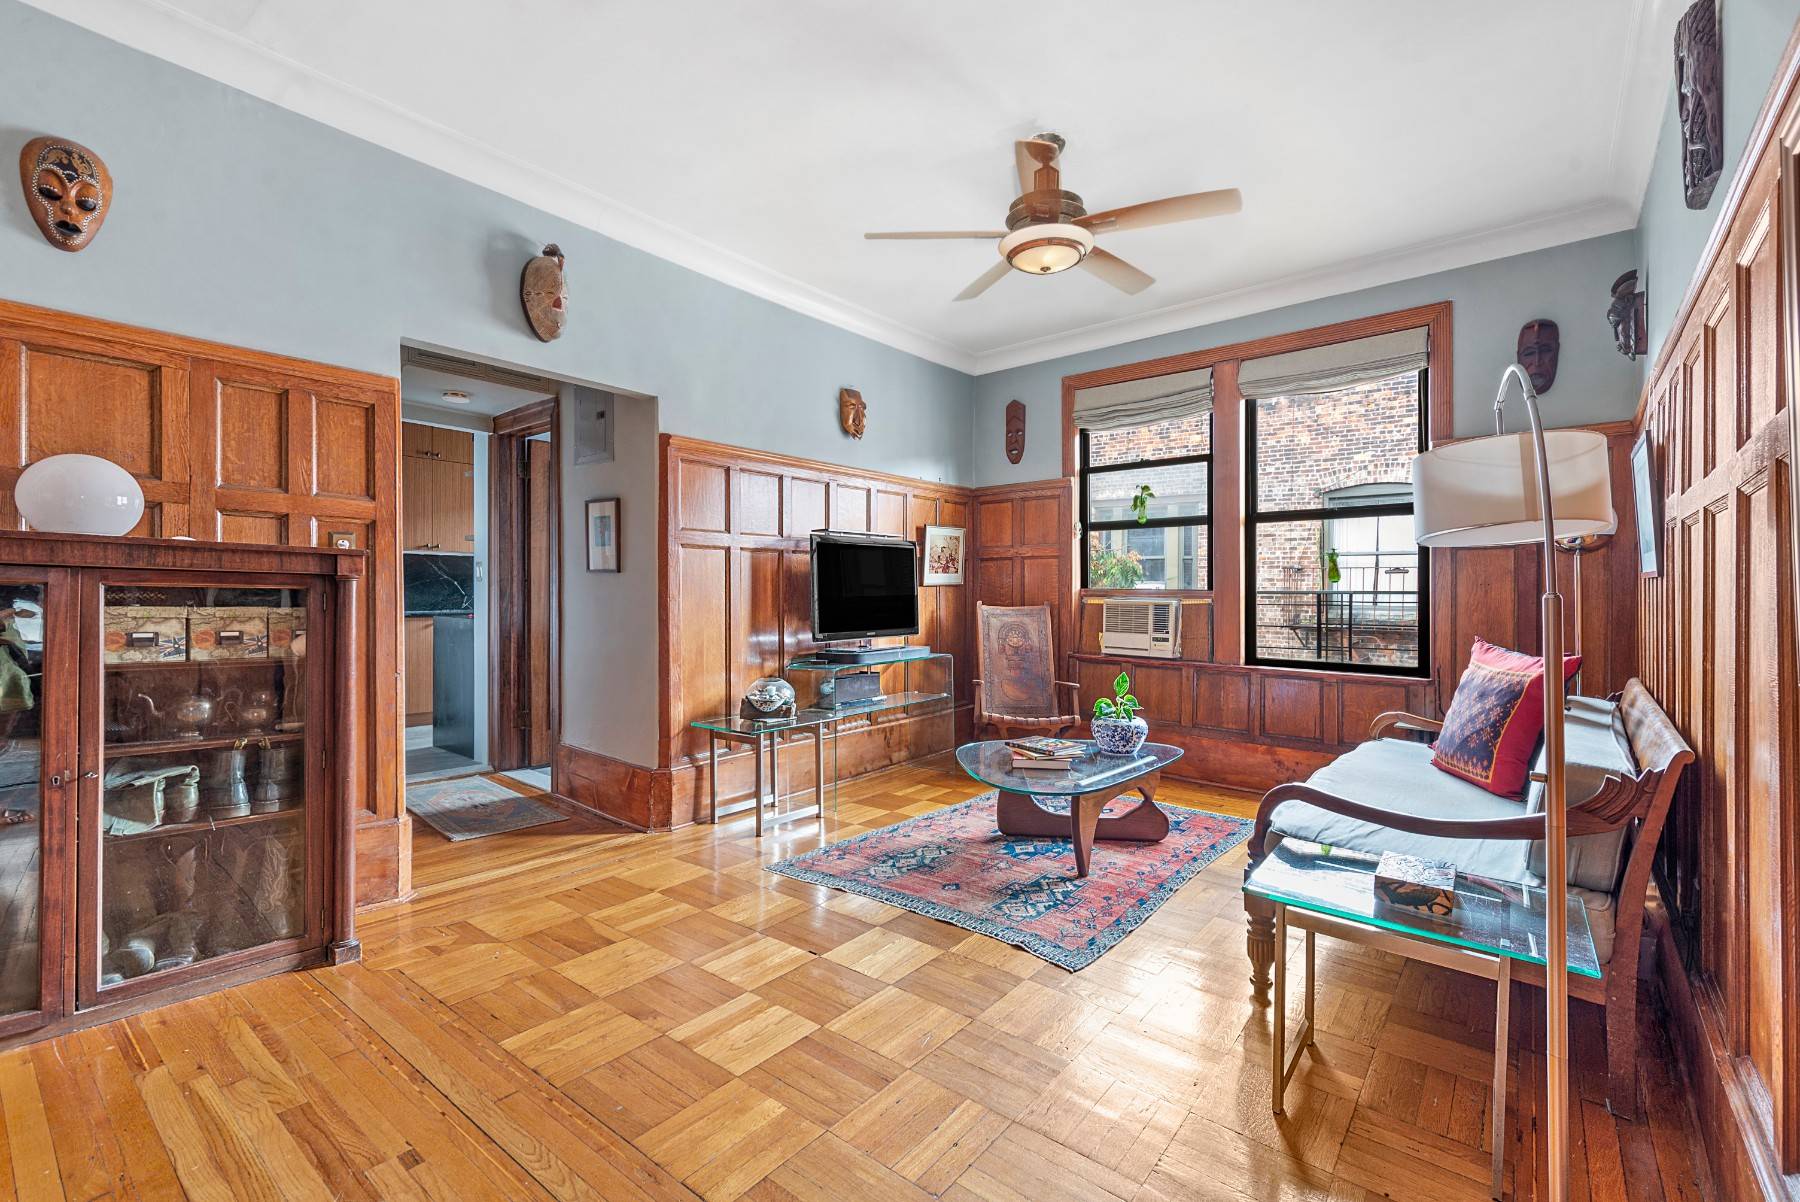 Apartment 64 is located in one of the finest cooperative buildings in Hudson Heights.